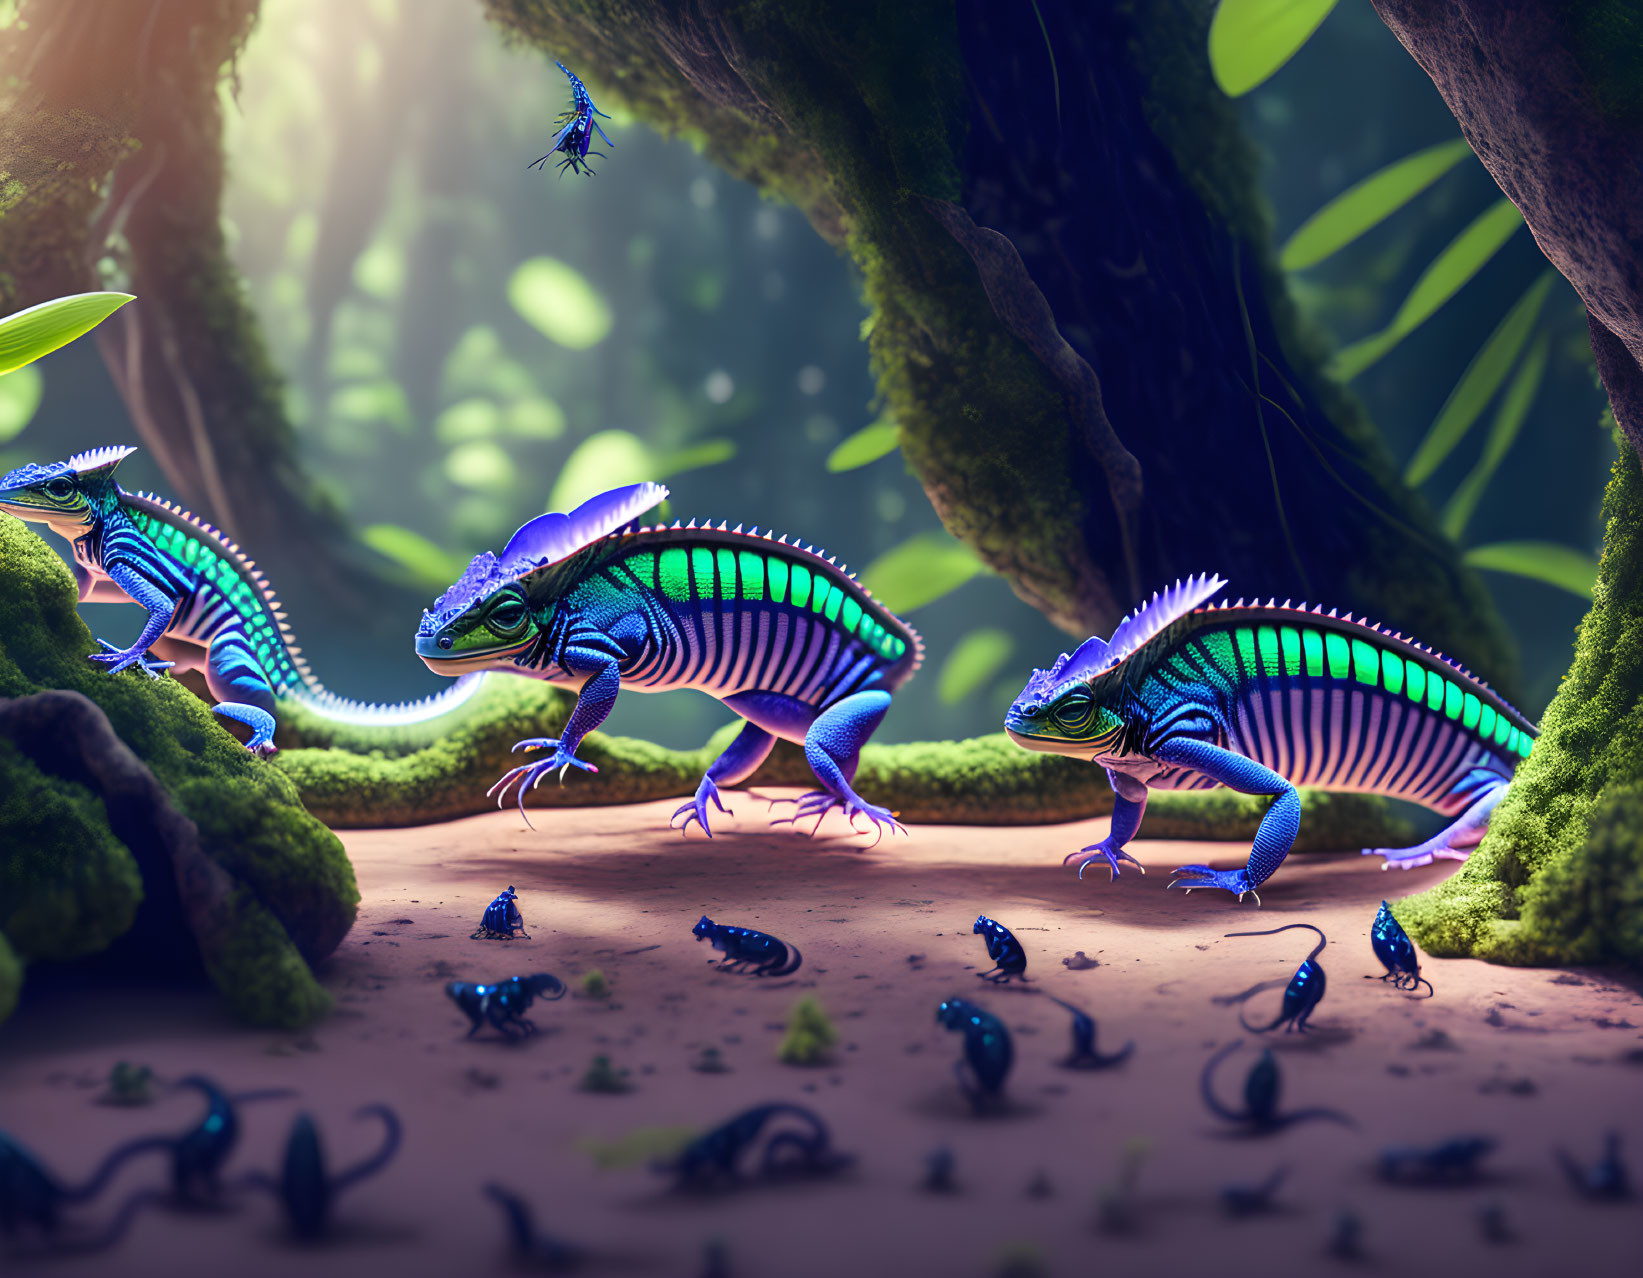 Colorful Frilled Lizards in Mystical Forest Scene